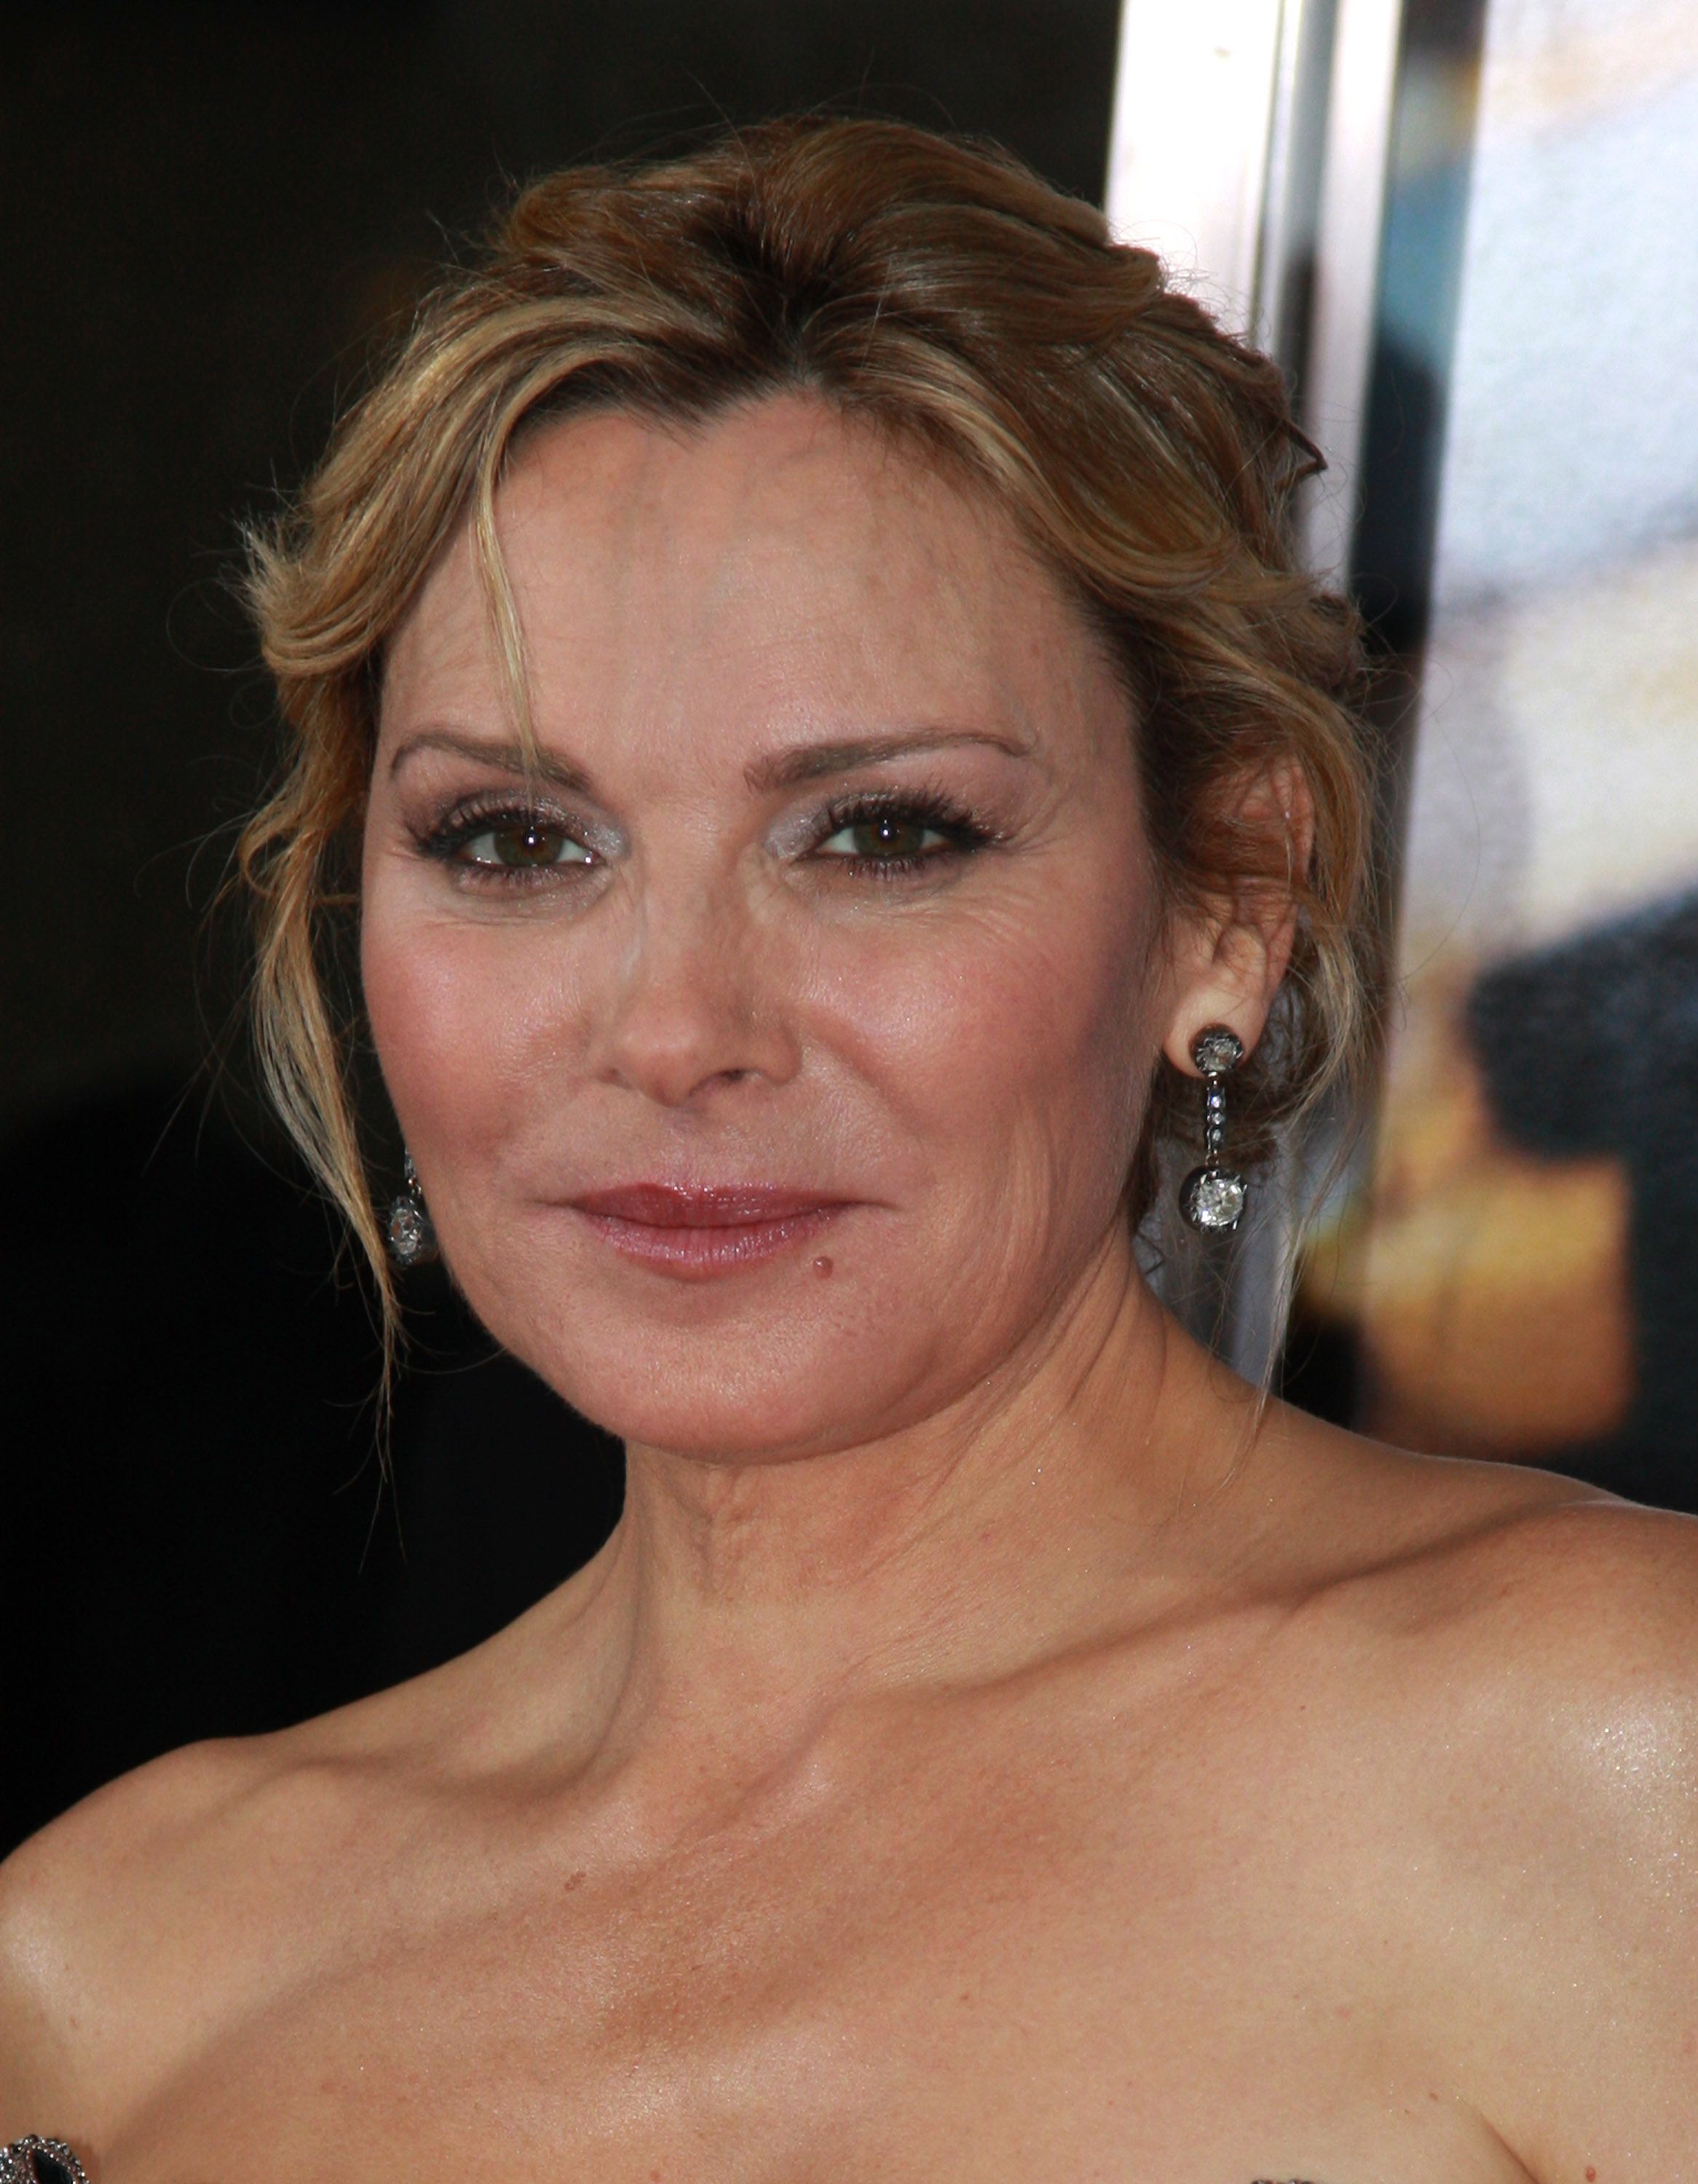 Kim Cattrall at the premiere of "Sex and the City: The Movie" on May 27, 2008, in New York City. | Source: Getty Images